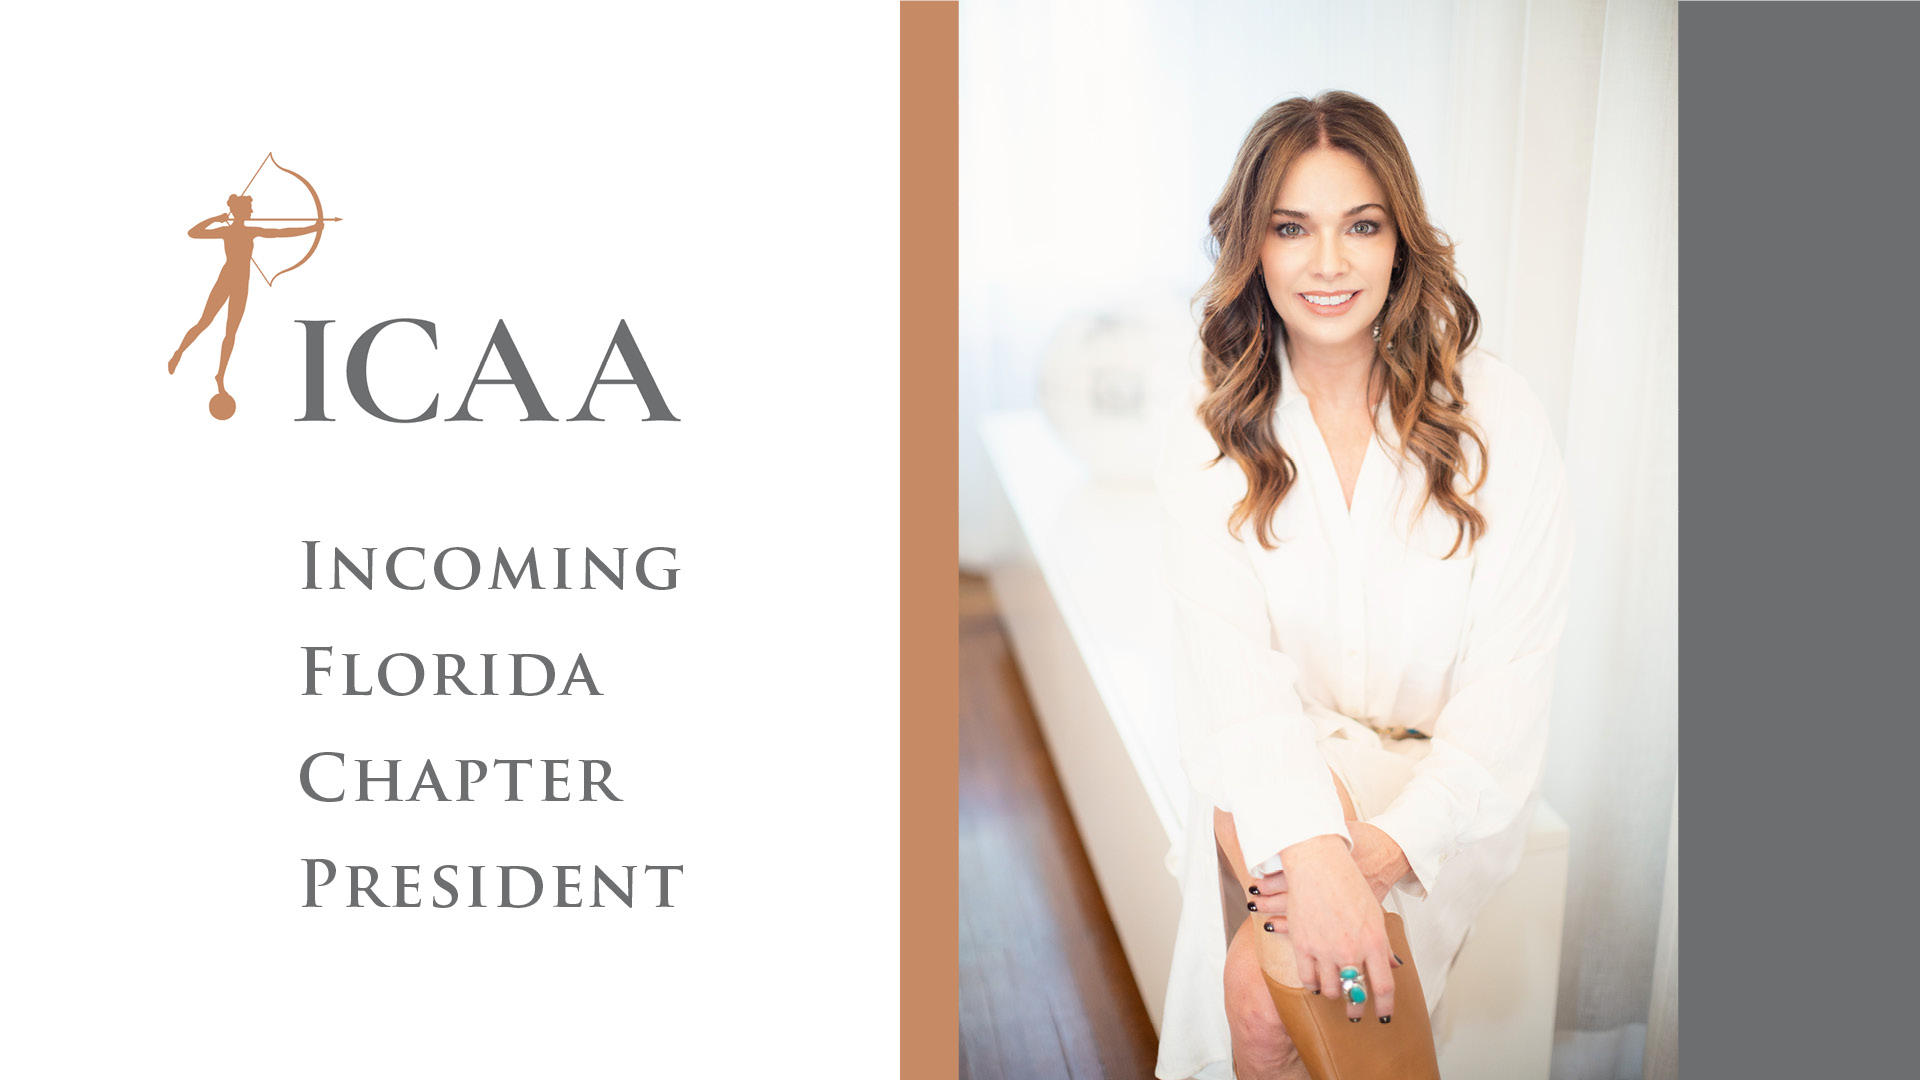 Classical Design Advocate Marsha Faulkner Elected as Incoming President of ICAA Florida Chapter